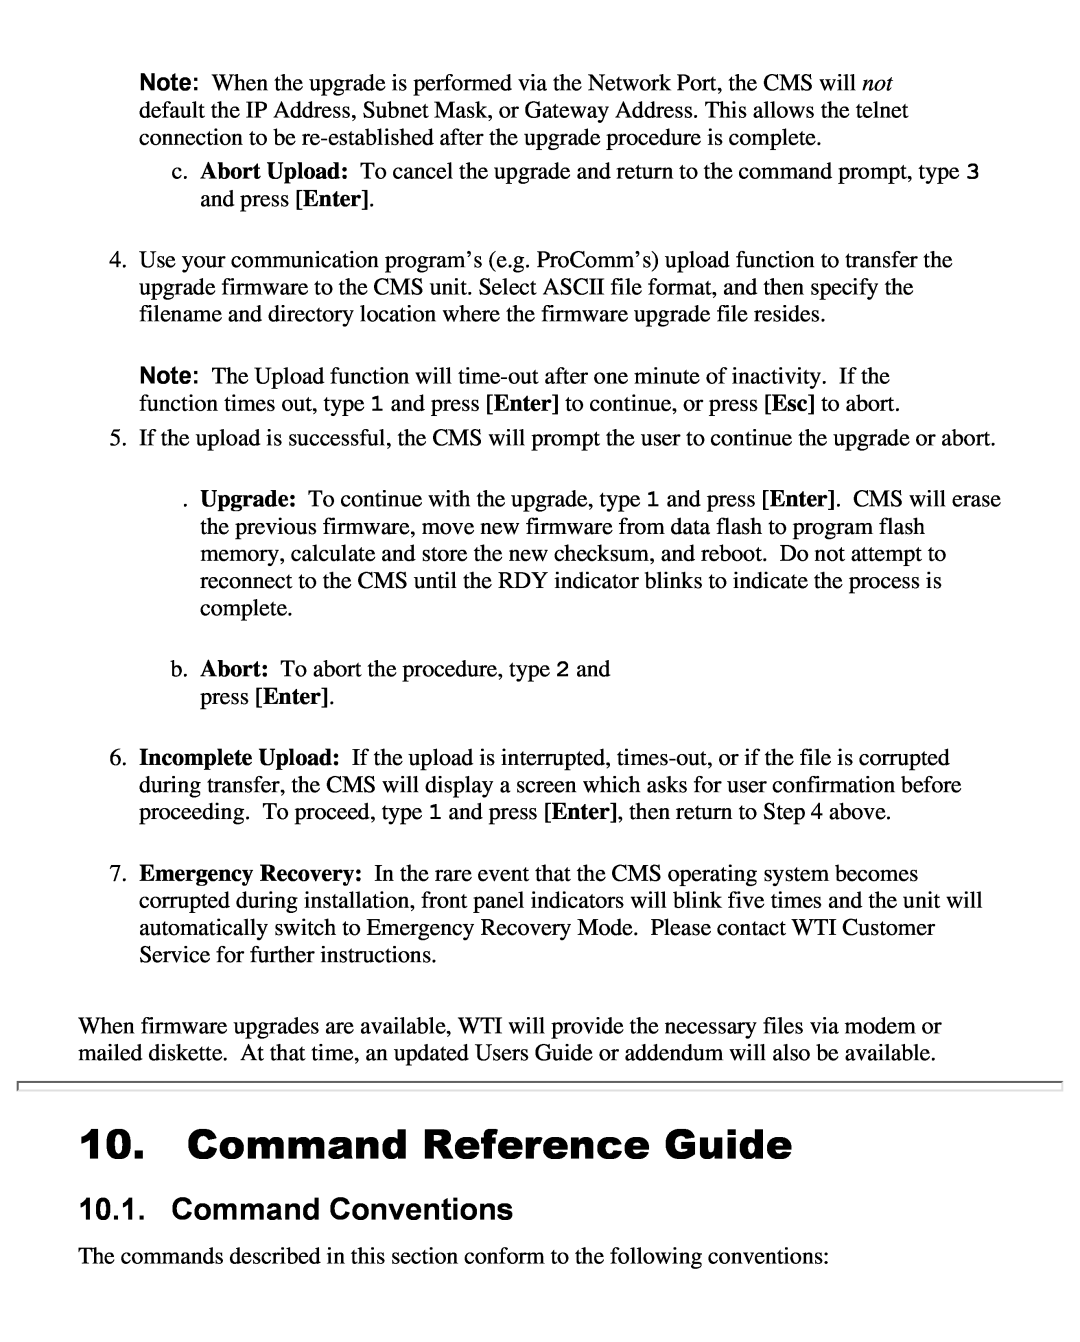 Western Telematic CMS-16 manual Command Reference Guide, Command Conventions 